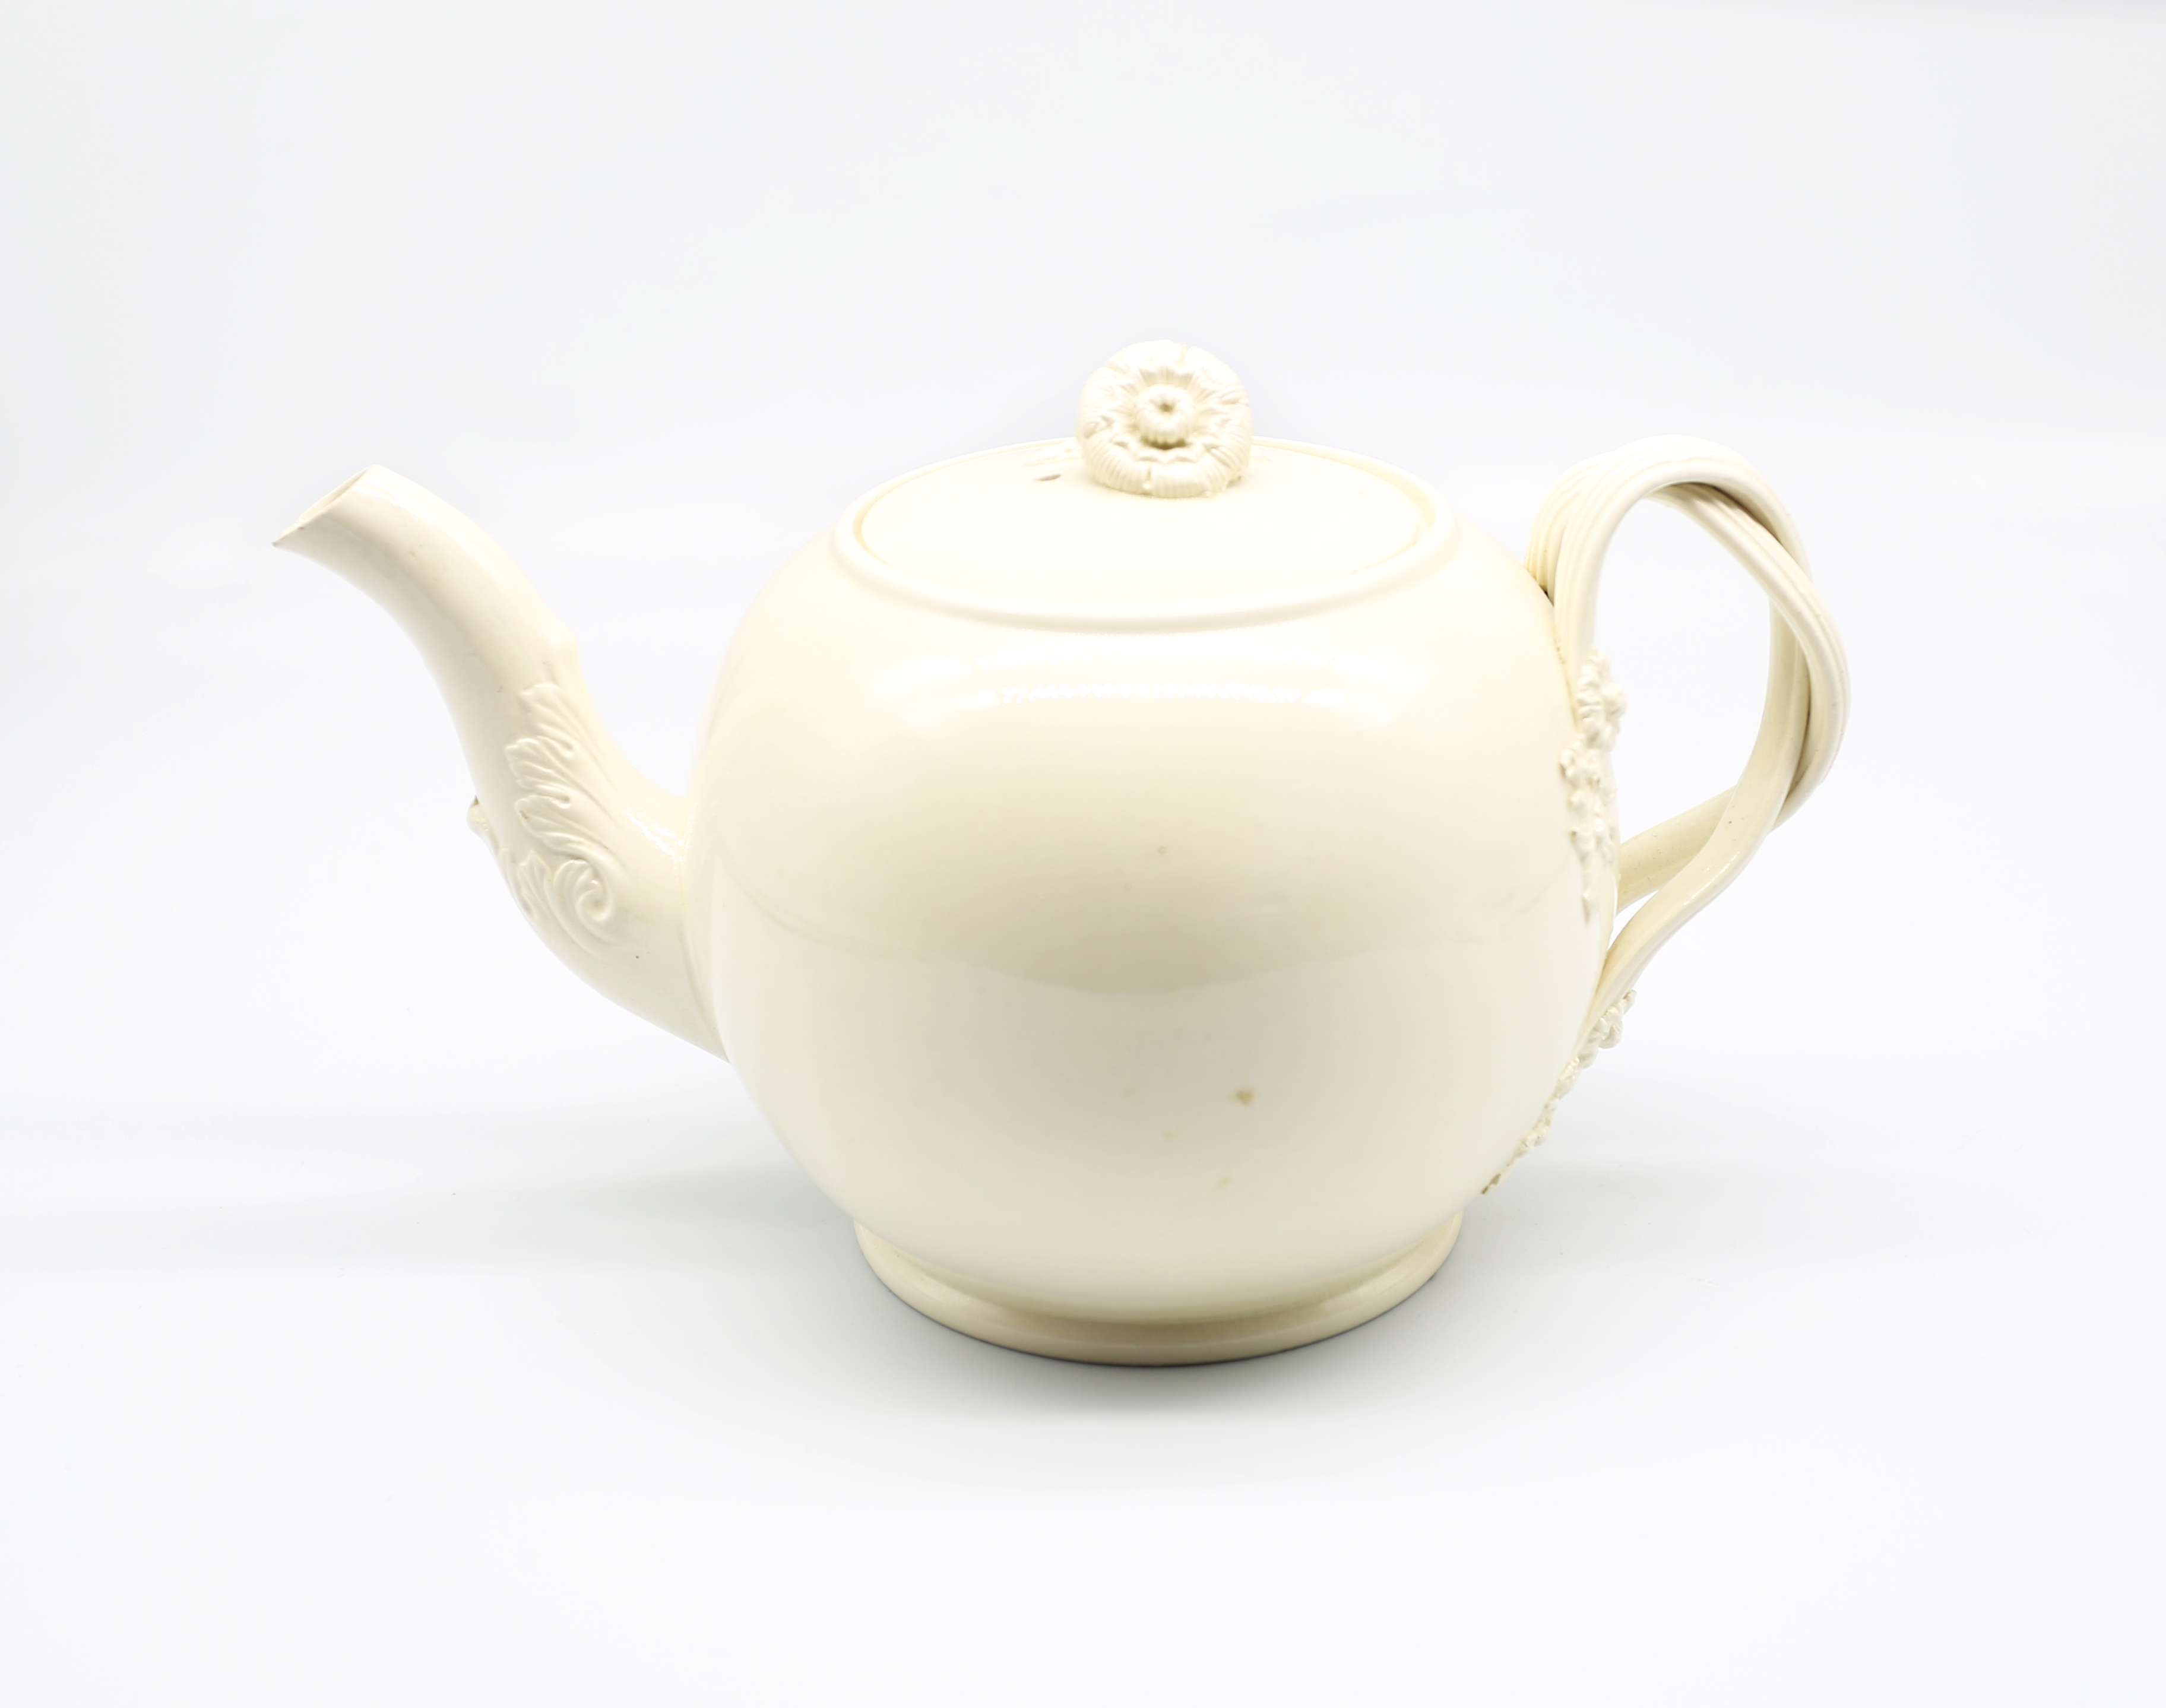 A Leeds creamware globular teapot and cover, with a twisted strap handle and floret terminals, the